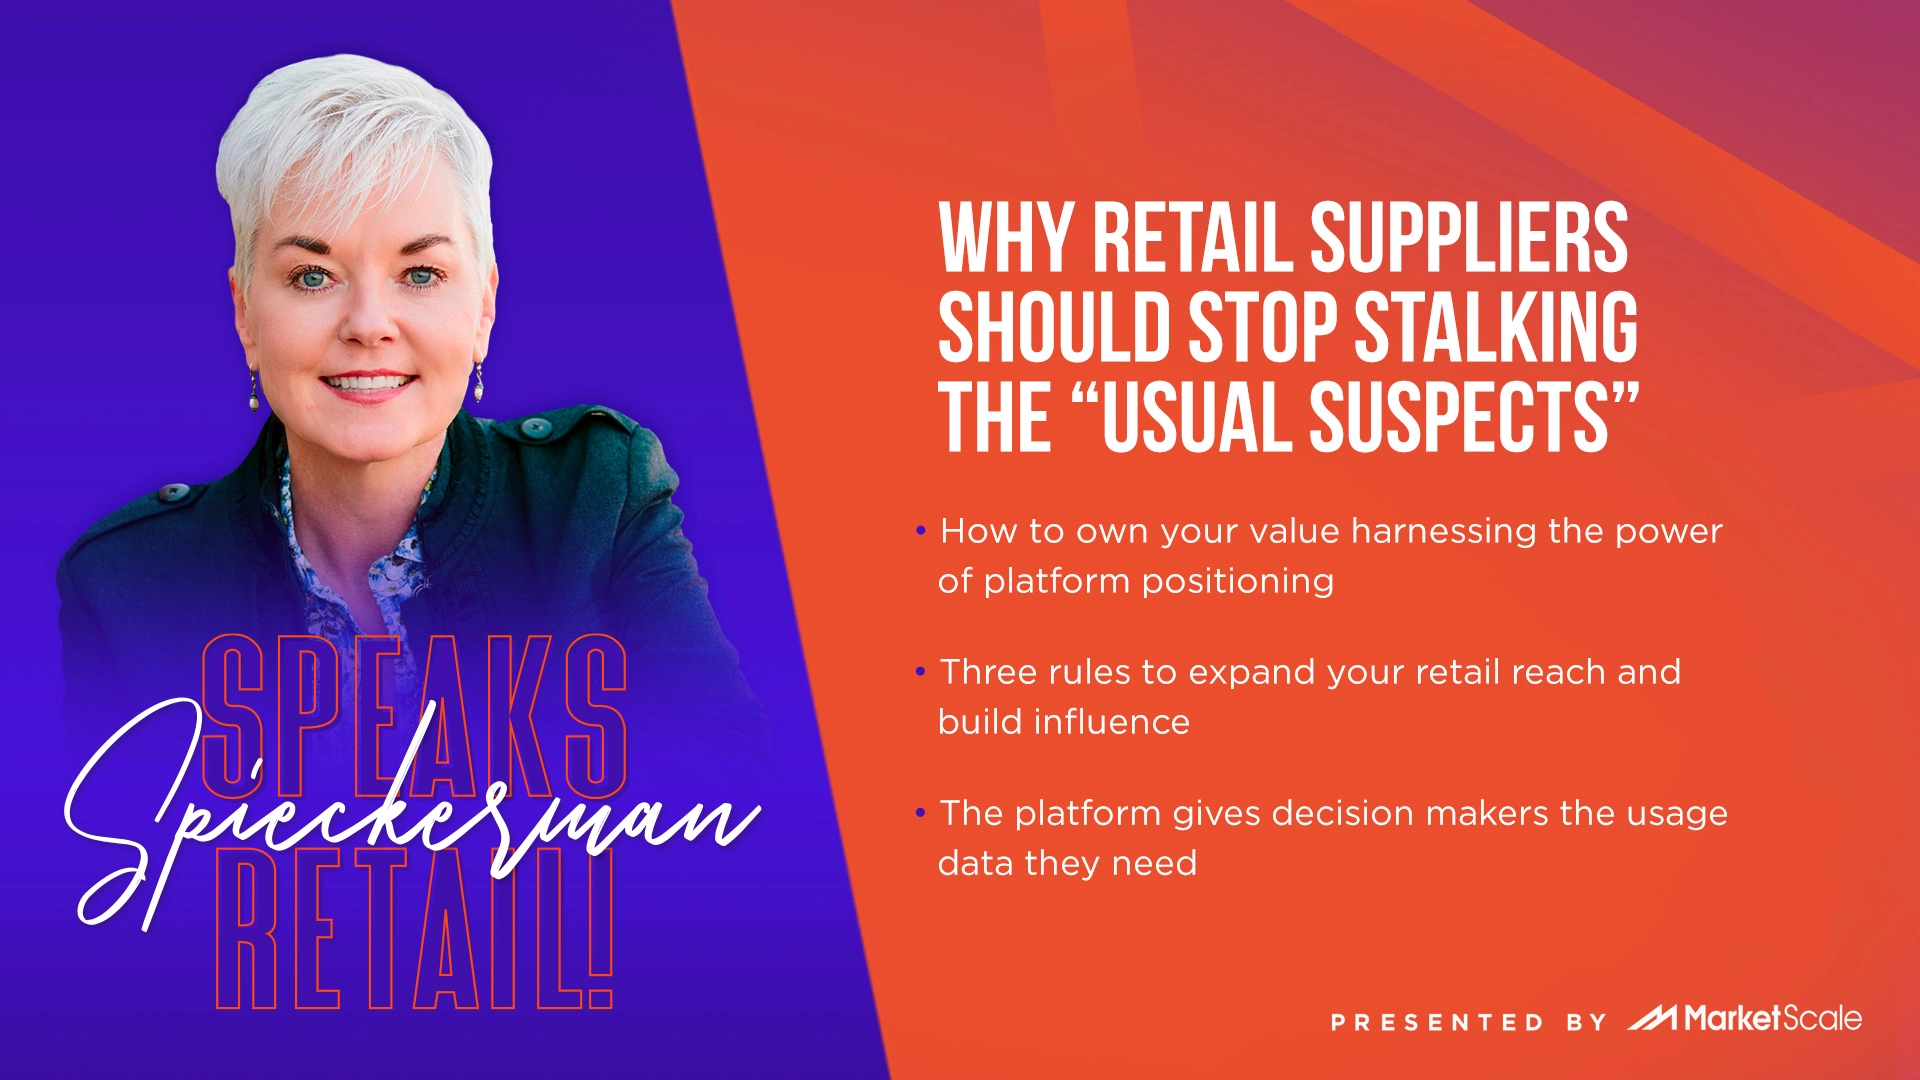 Why Retail Suppliers Should Stop Stalking the “Usual Suspects”: Spieckerman Speaks Retail